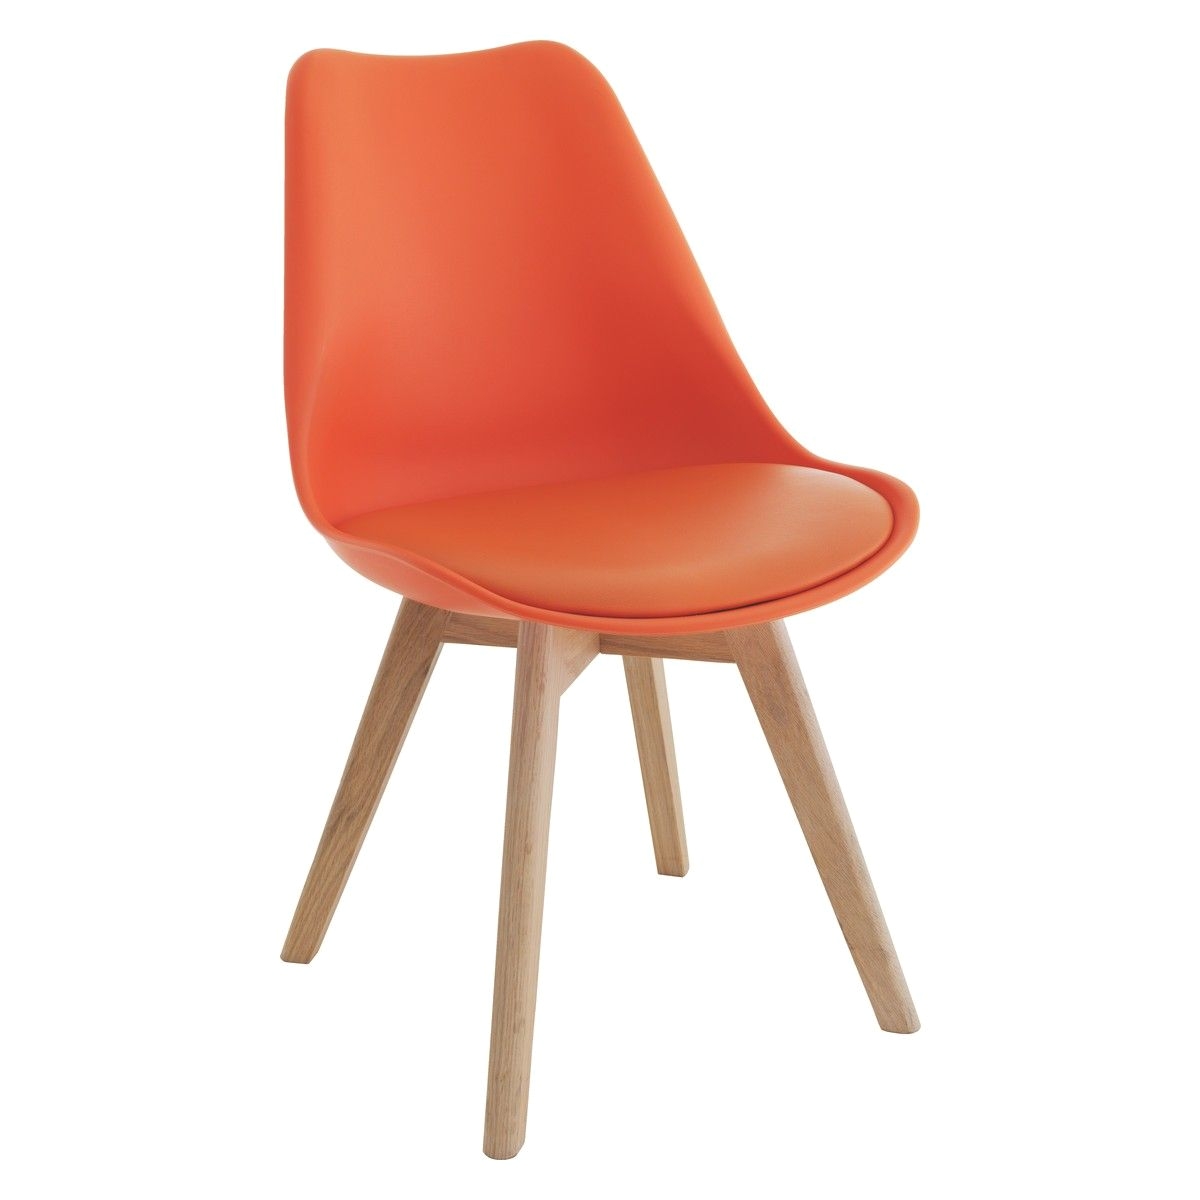 Cheap Salon Chairs for Sale Uk Jerry orange Dining Chair Buy now at Habitat Uk Hues Of orange